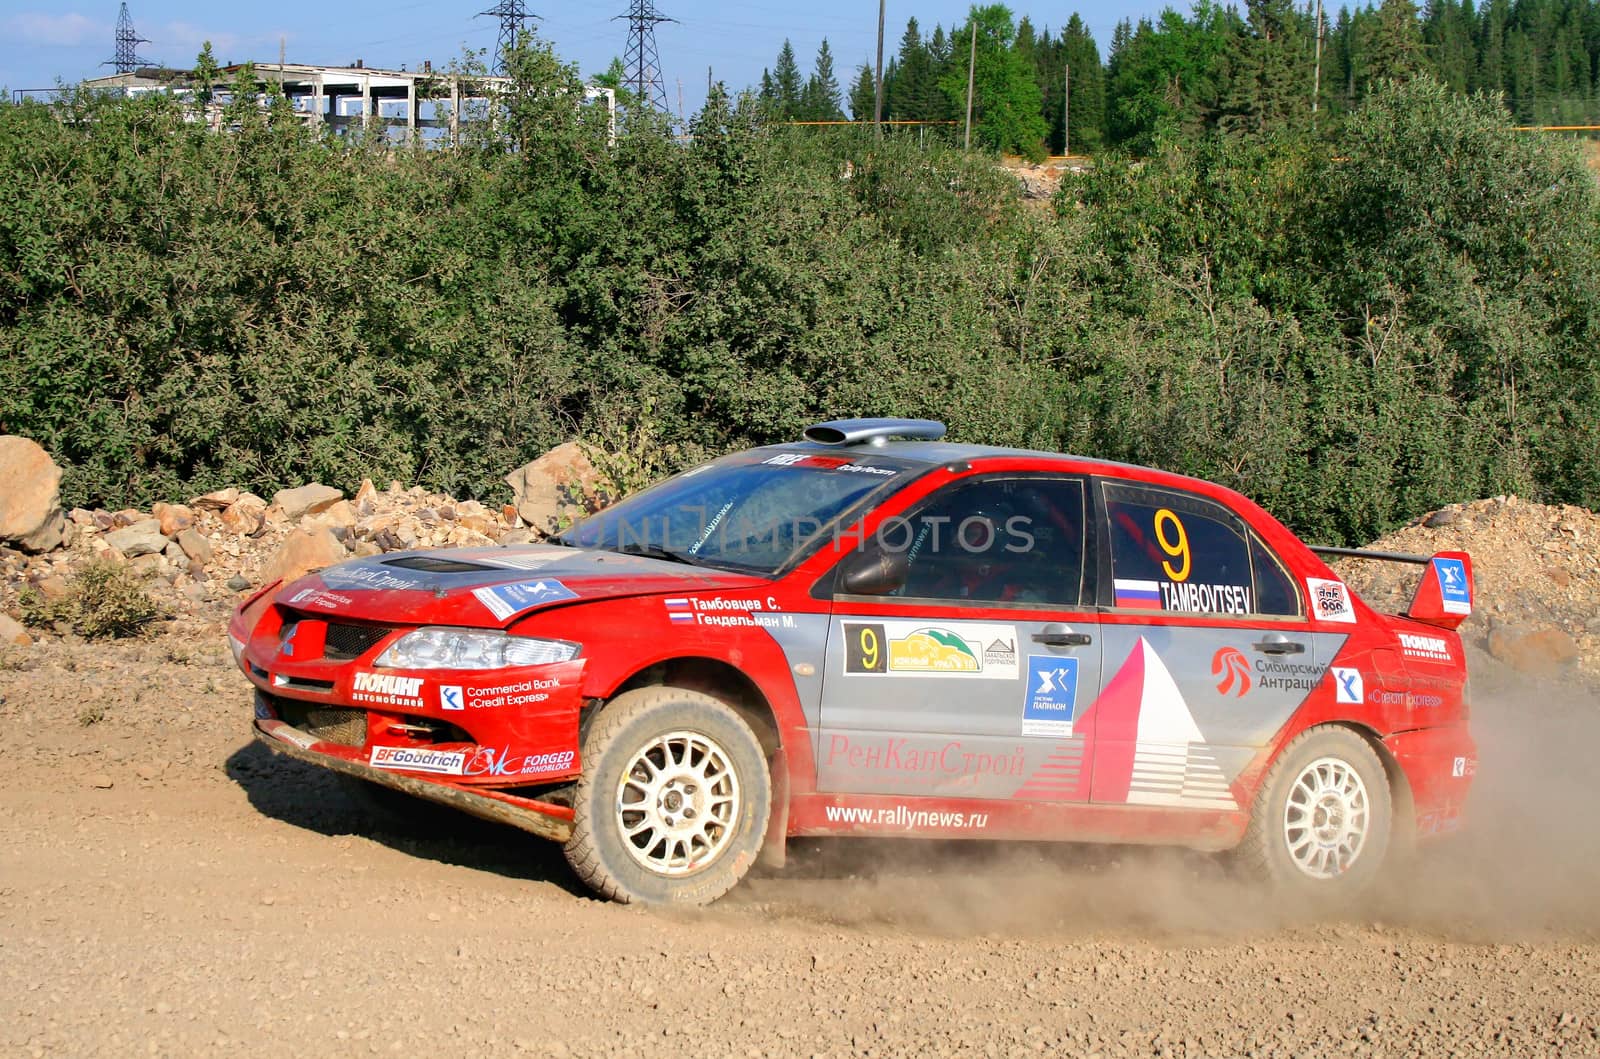 BAKAL, RUSSIA - AUGUST 13: Sergey Tambovtsev's Mitsubishi Lancer Evo VIII (No. 9) competes at the annual Rally Southern Ural on August 13, 2010 in Bakal, Satka district, Chelyabinsk region, Russia.